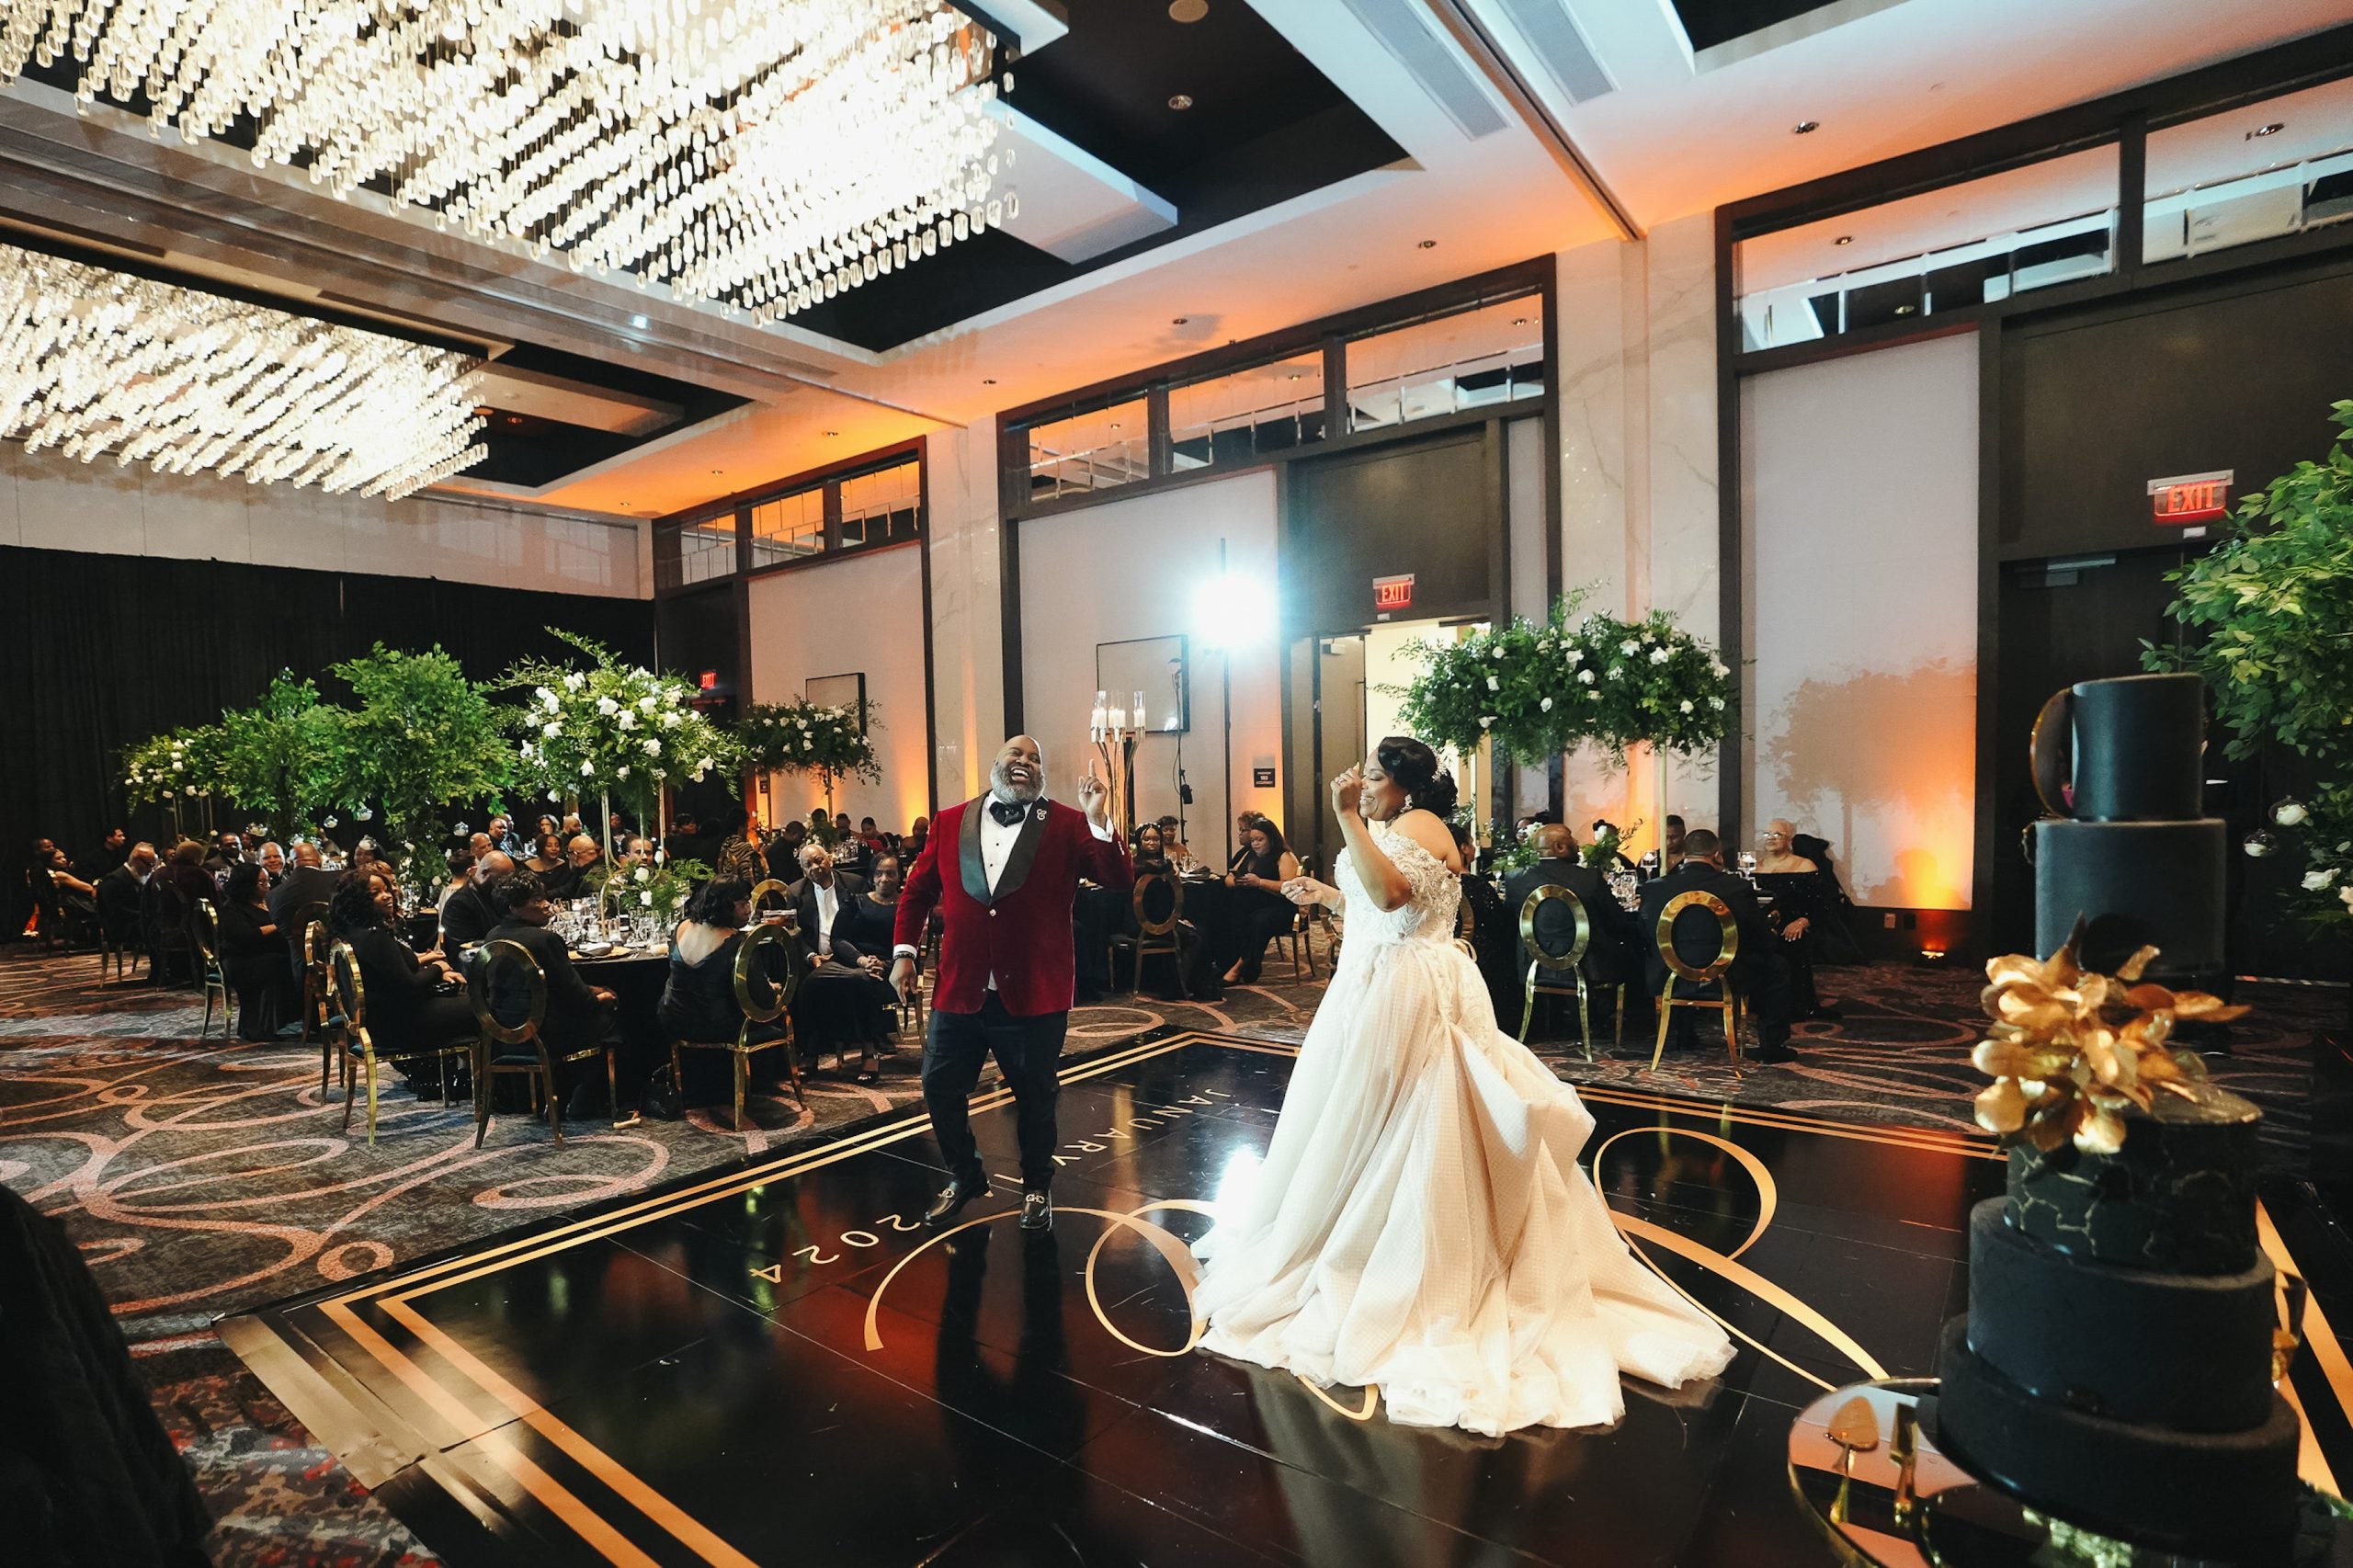 Bridal Bliss: Connie And Chip Celebrated A Second Chance At Love With A Classy Winter Wedding In Maryland